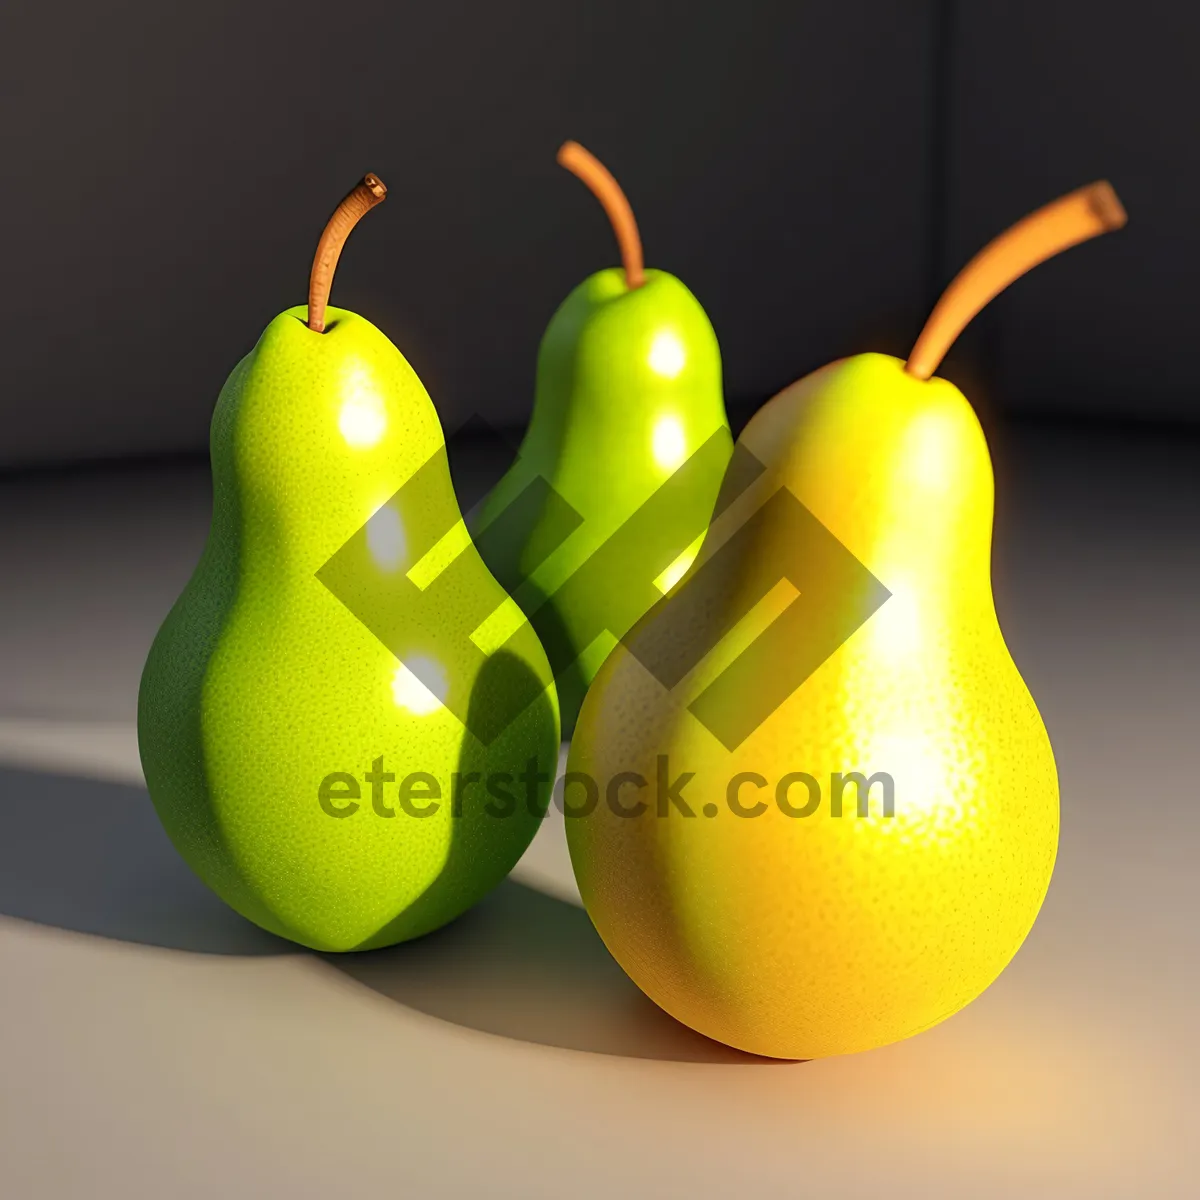 Picture of Ripe Yellow Pear - Sweet and Juicy Fruit